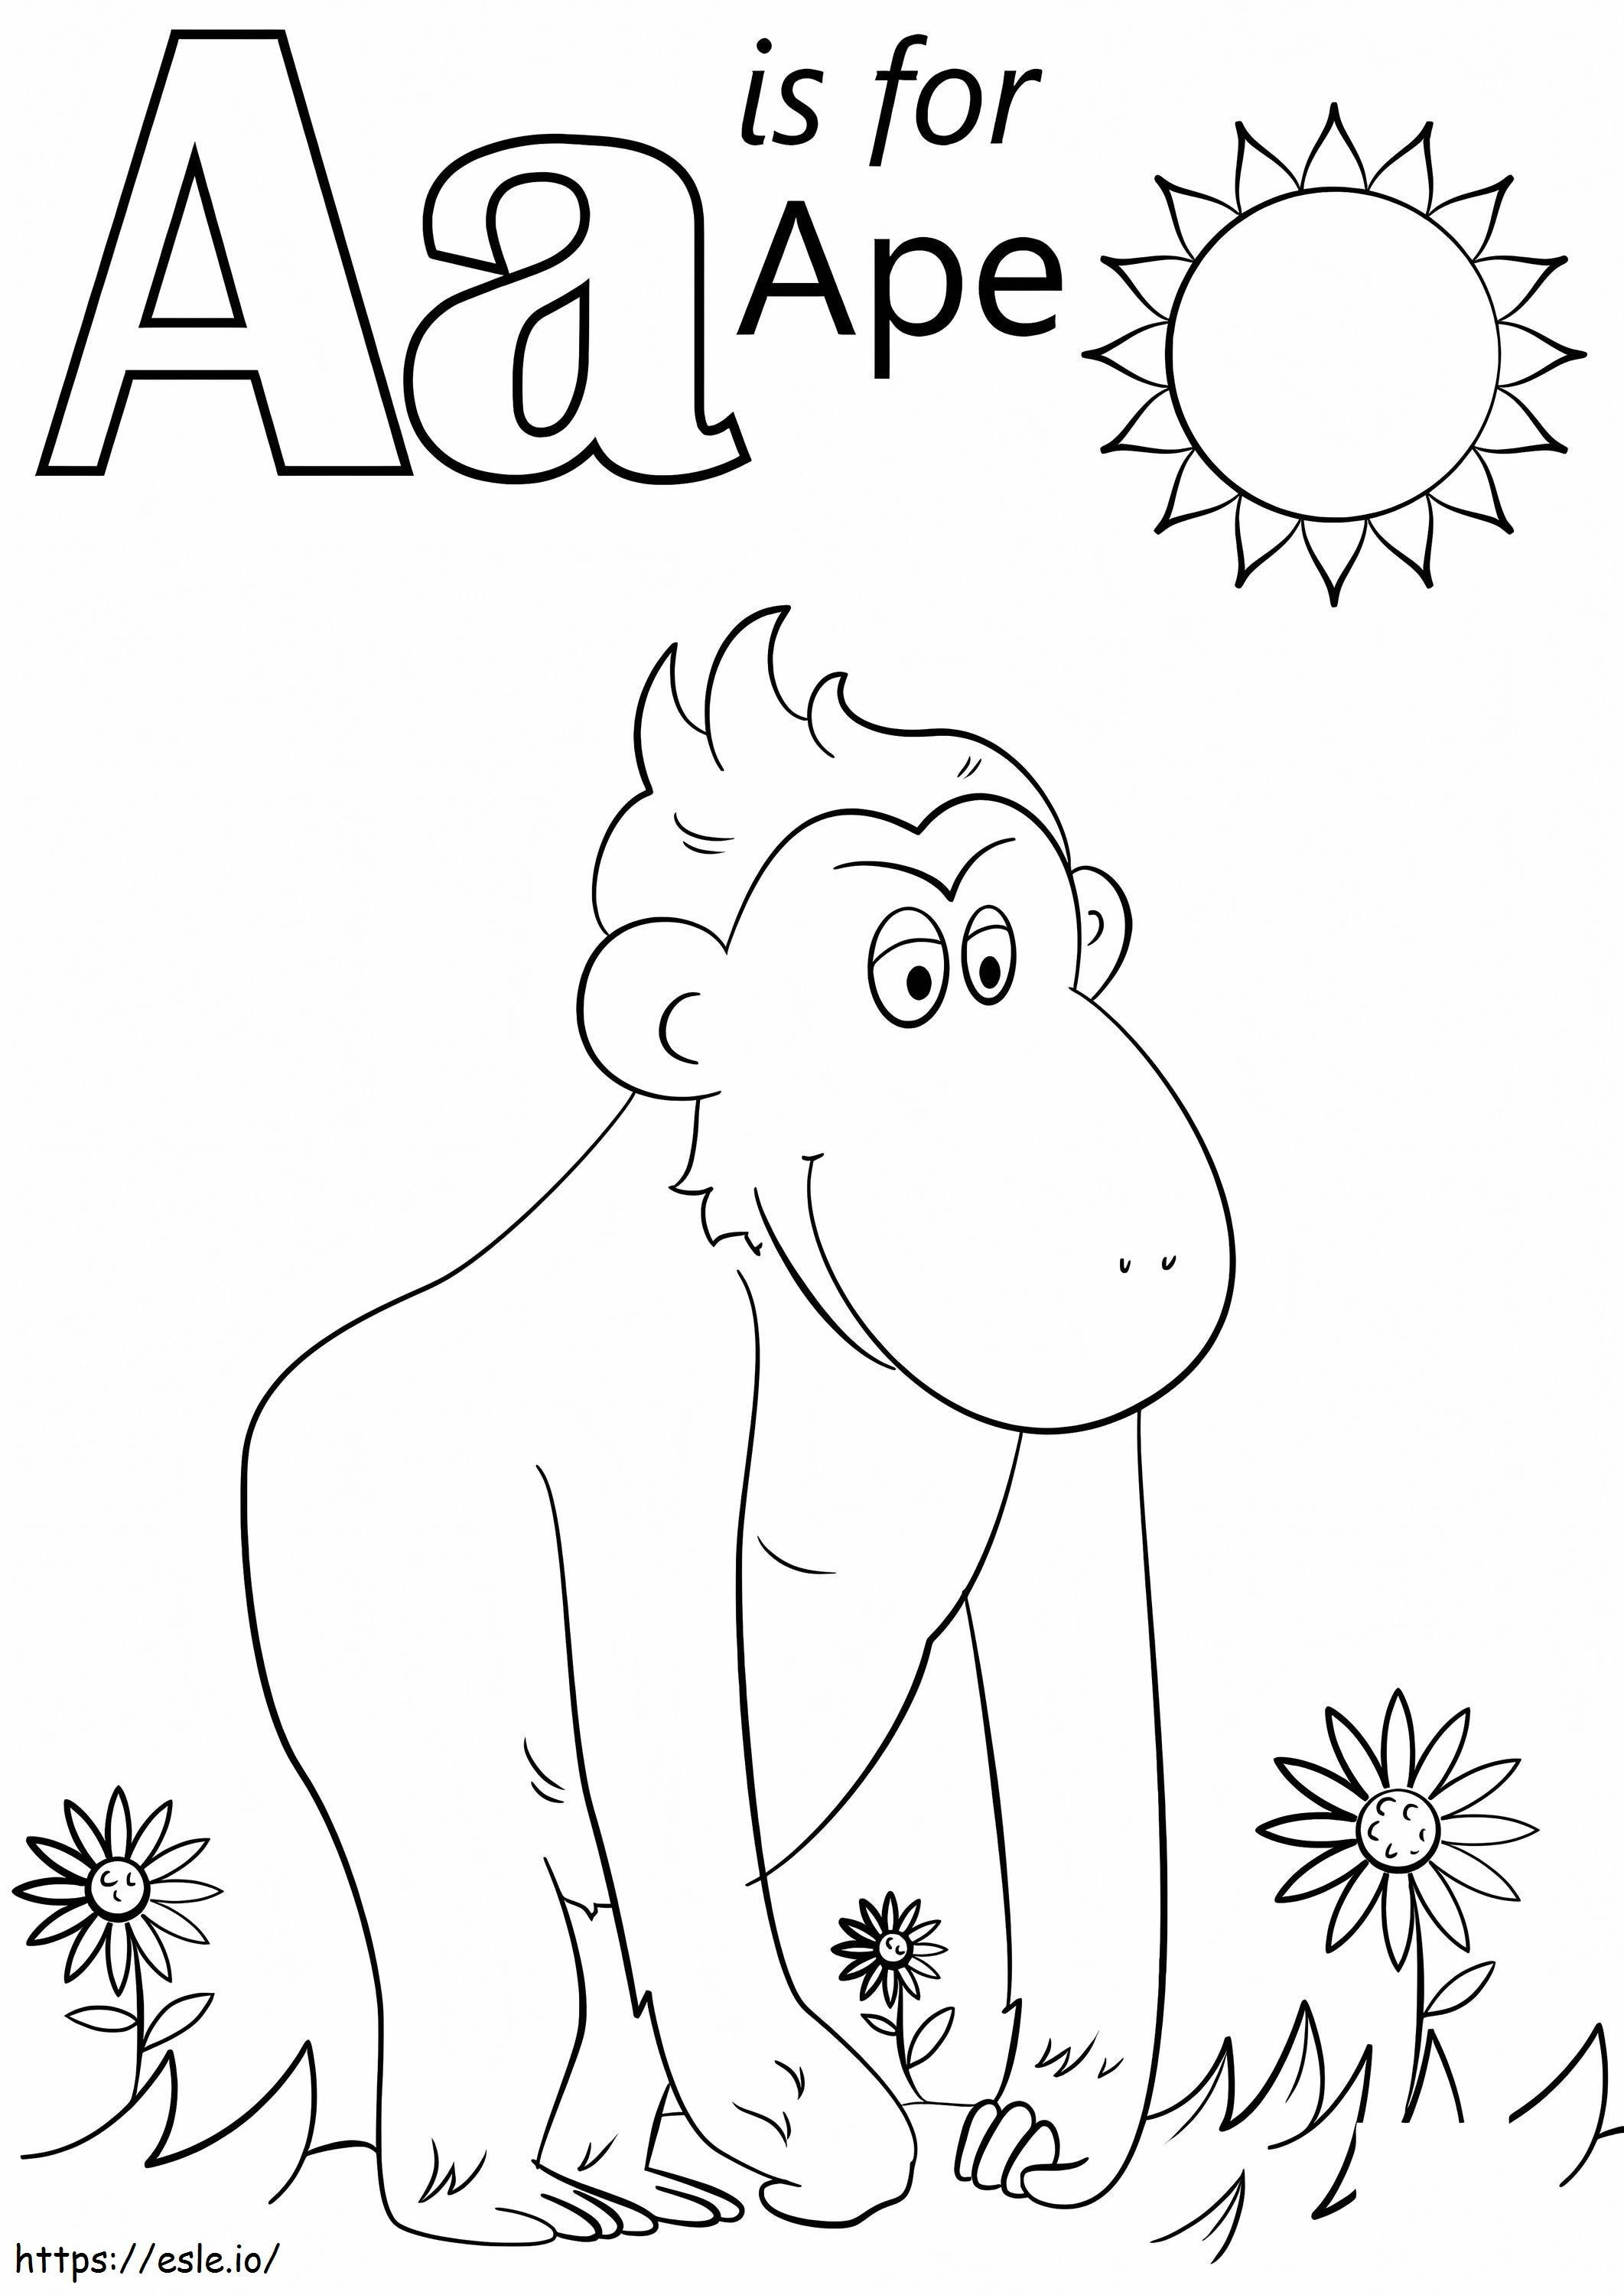 A Is For Ape coloring page